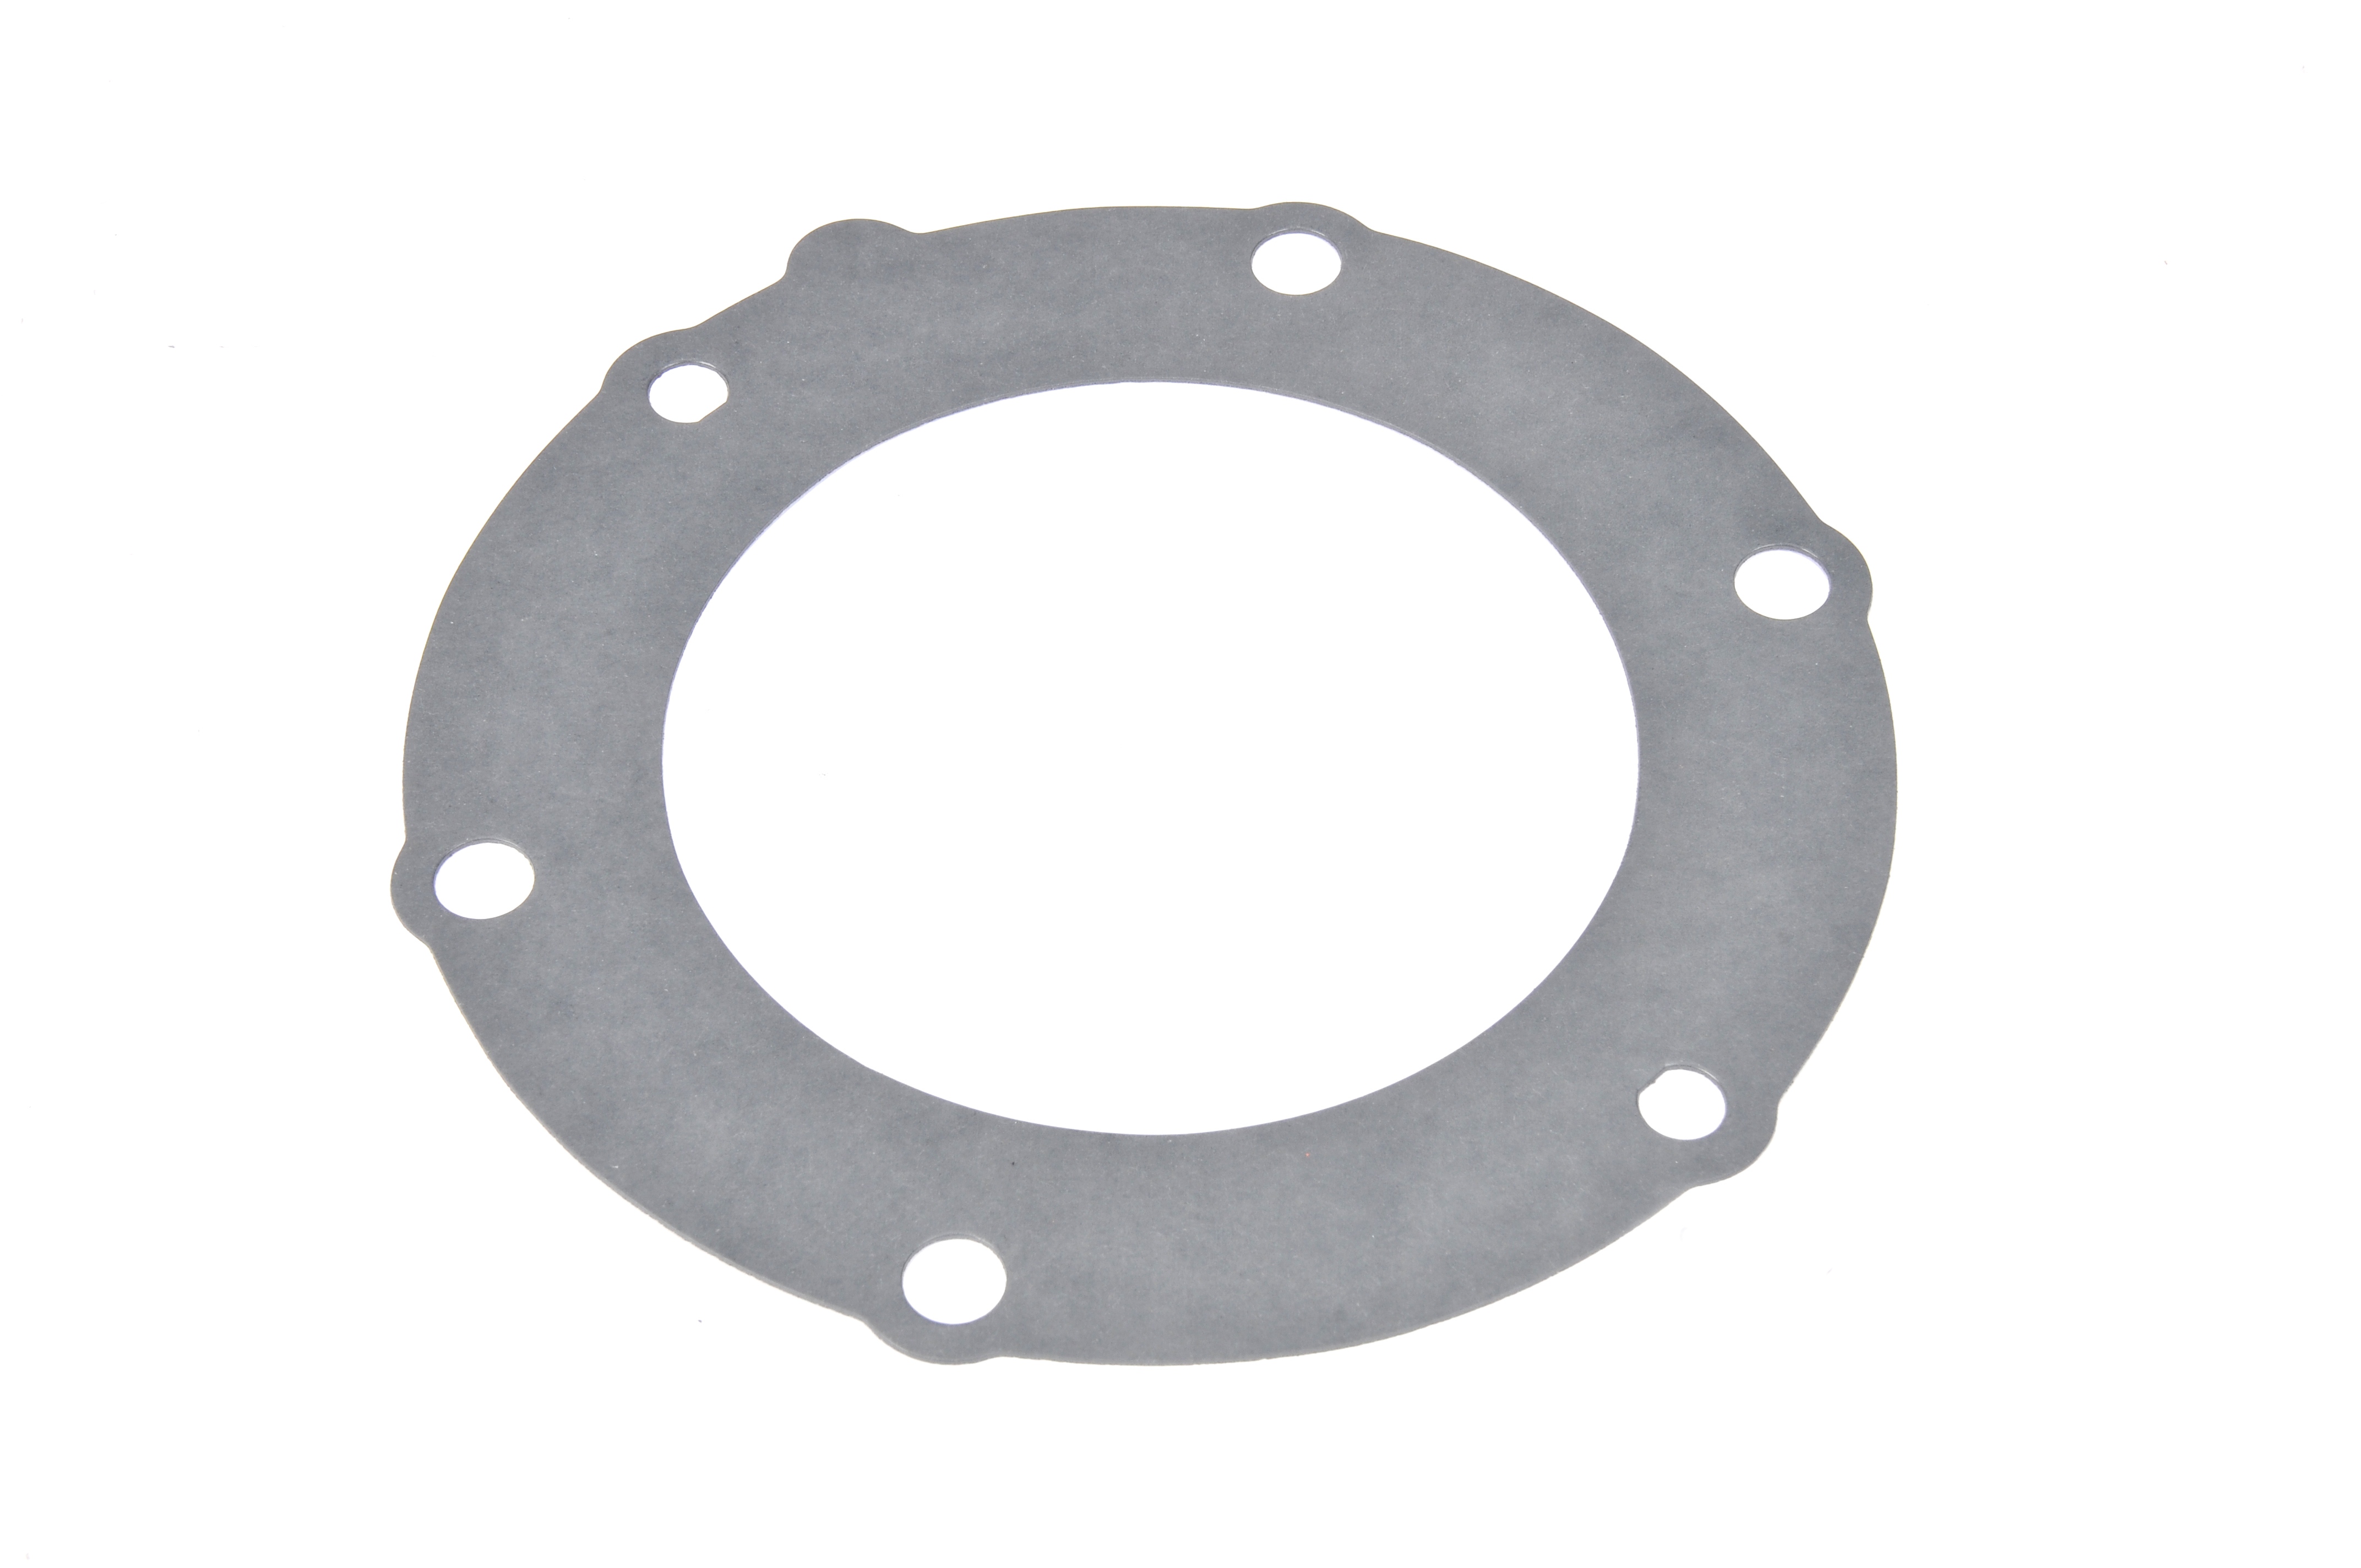 GM GENUINE PARTS - Transfer Case Adapter Gasket - GMP 24245110